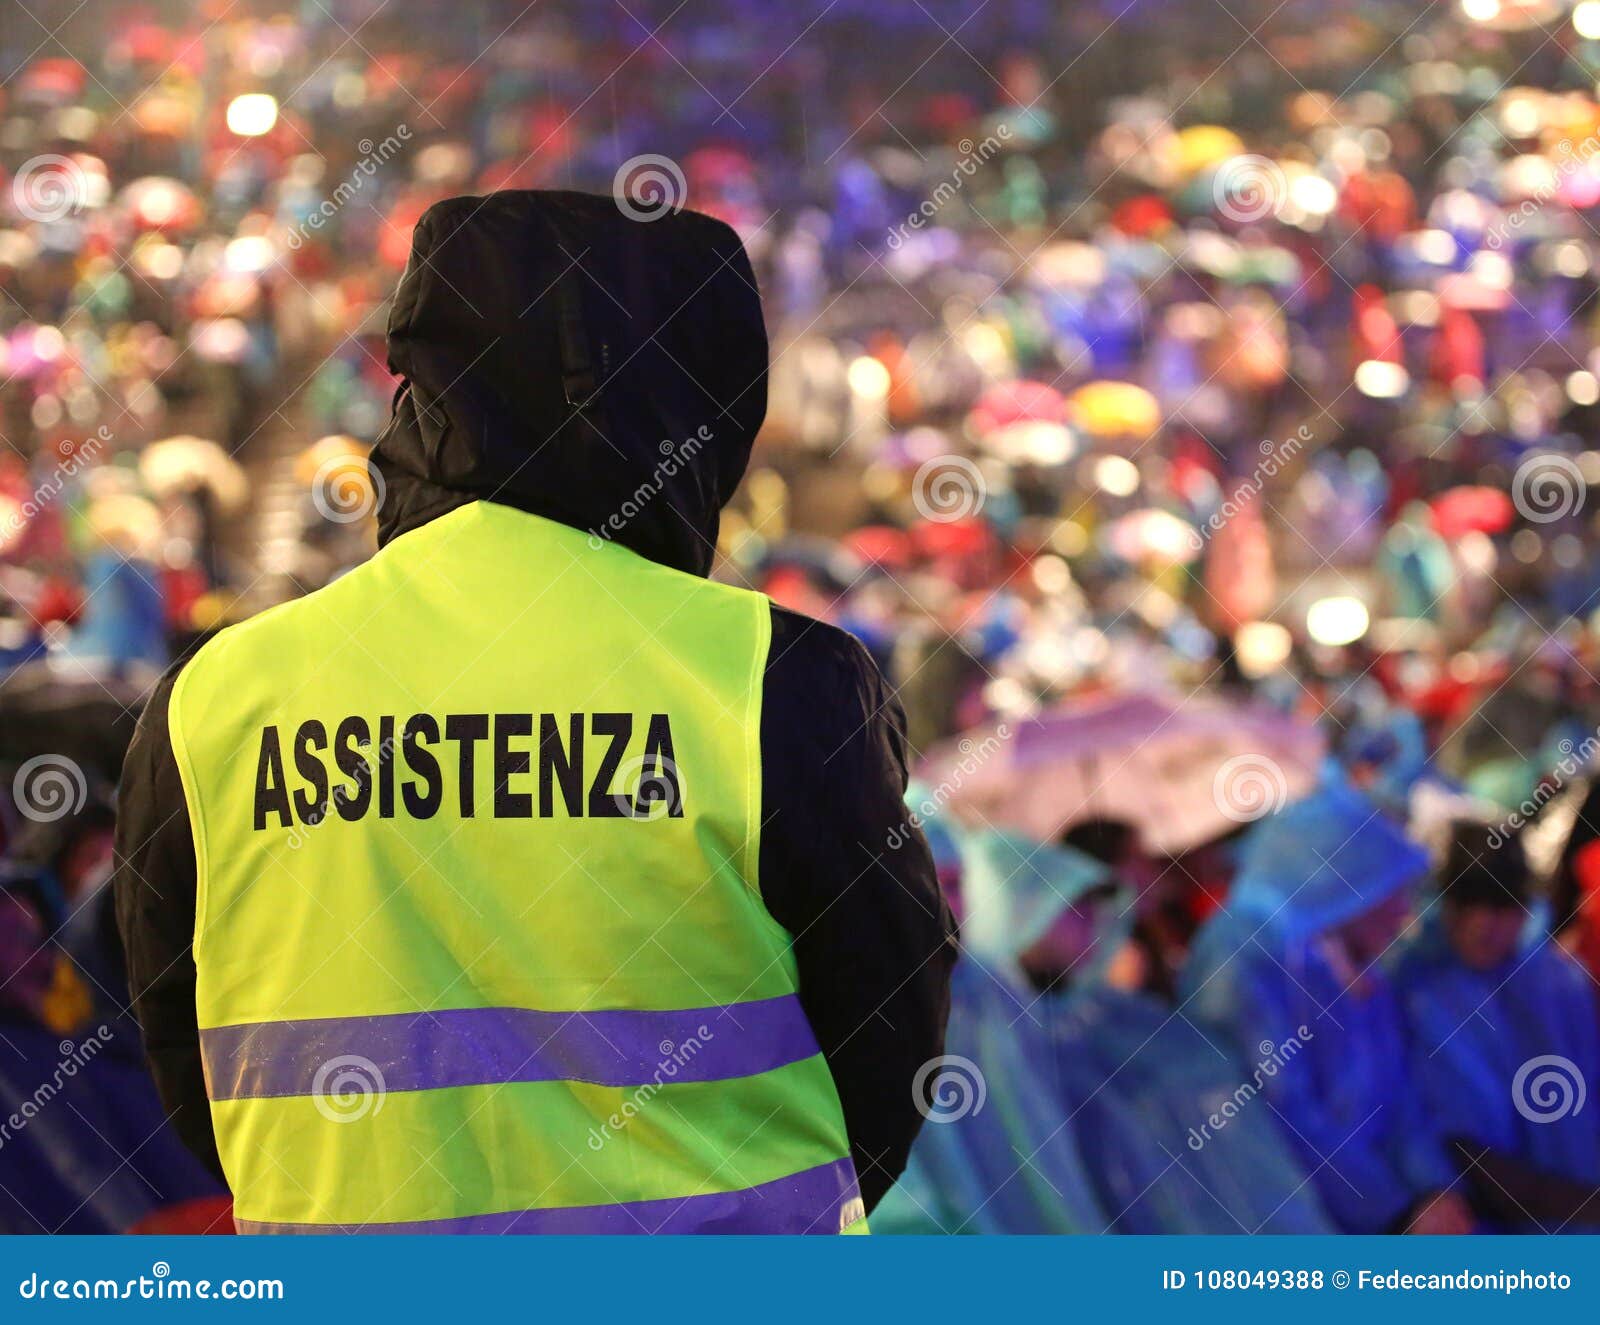 italian security guard during the event with text assistenza that means assitance in italian language